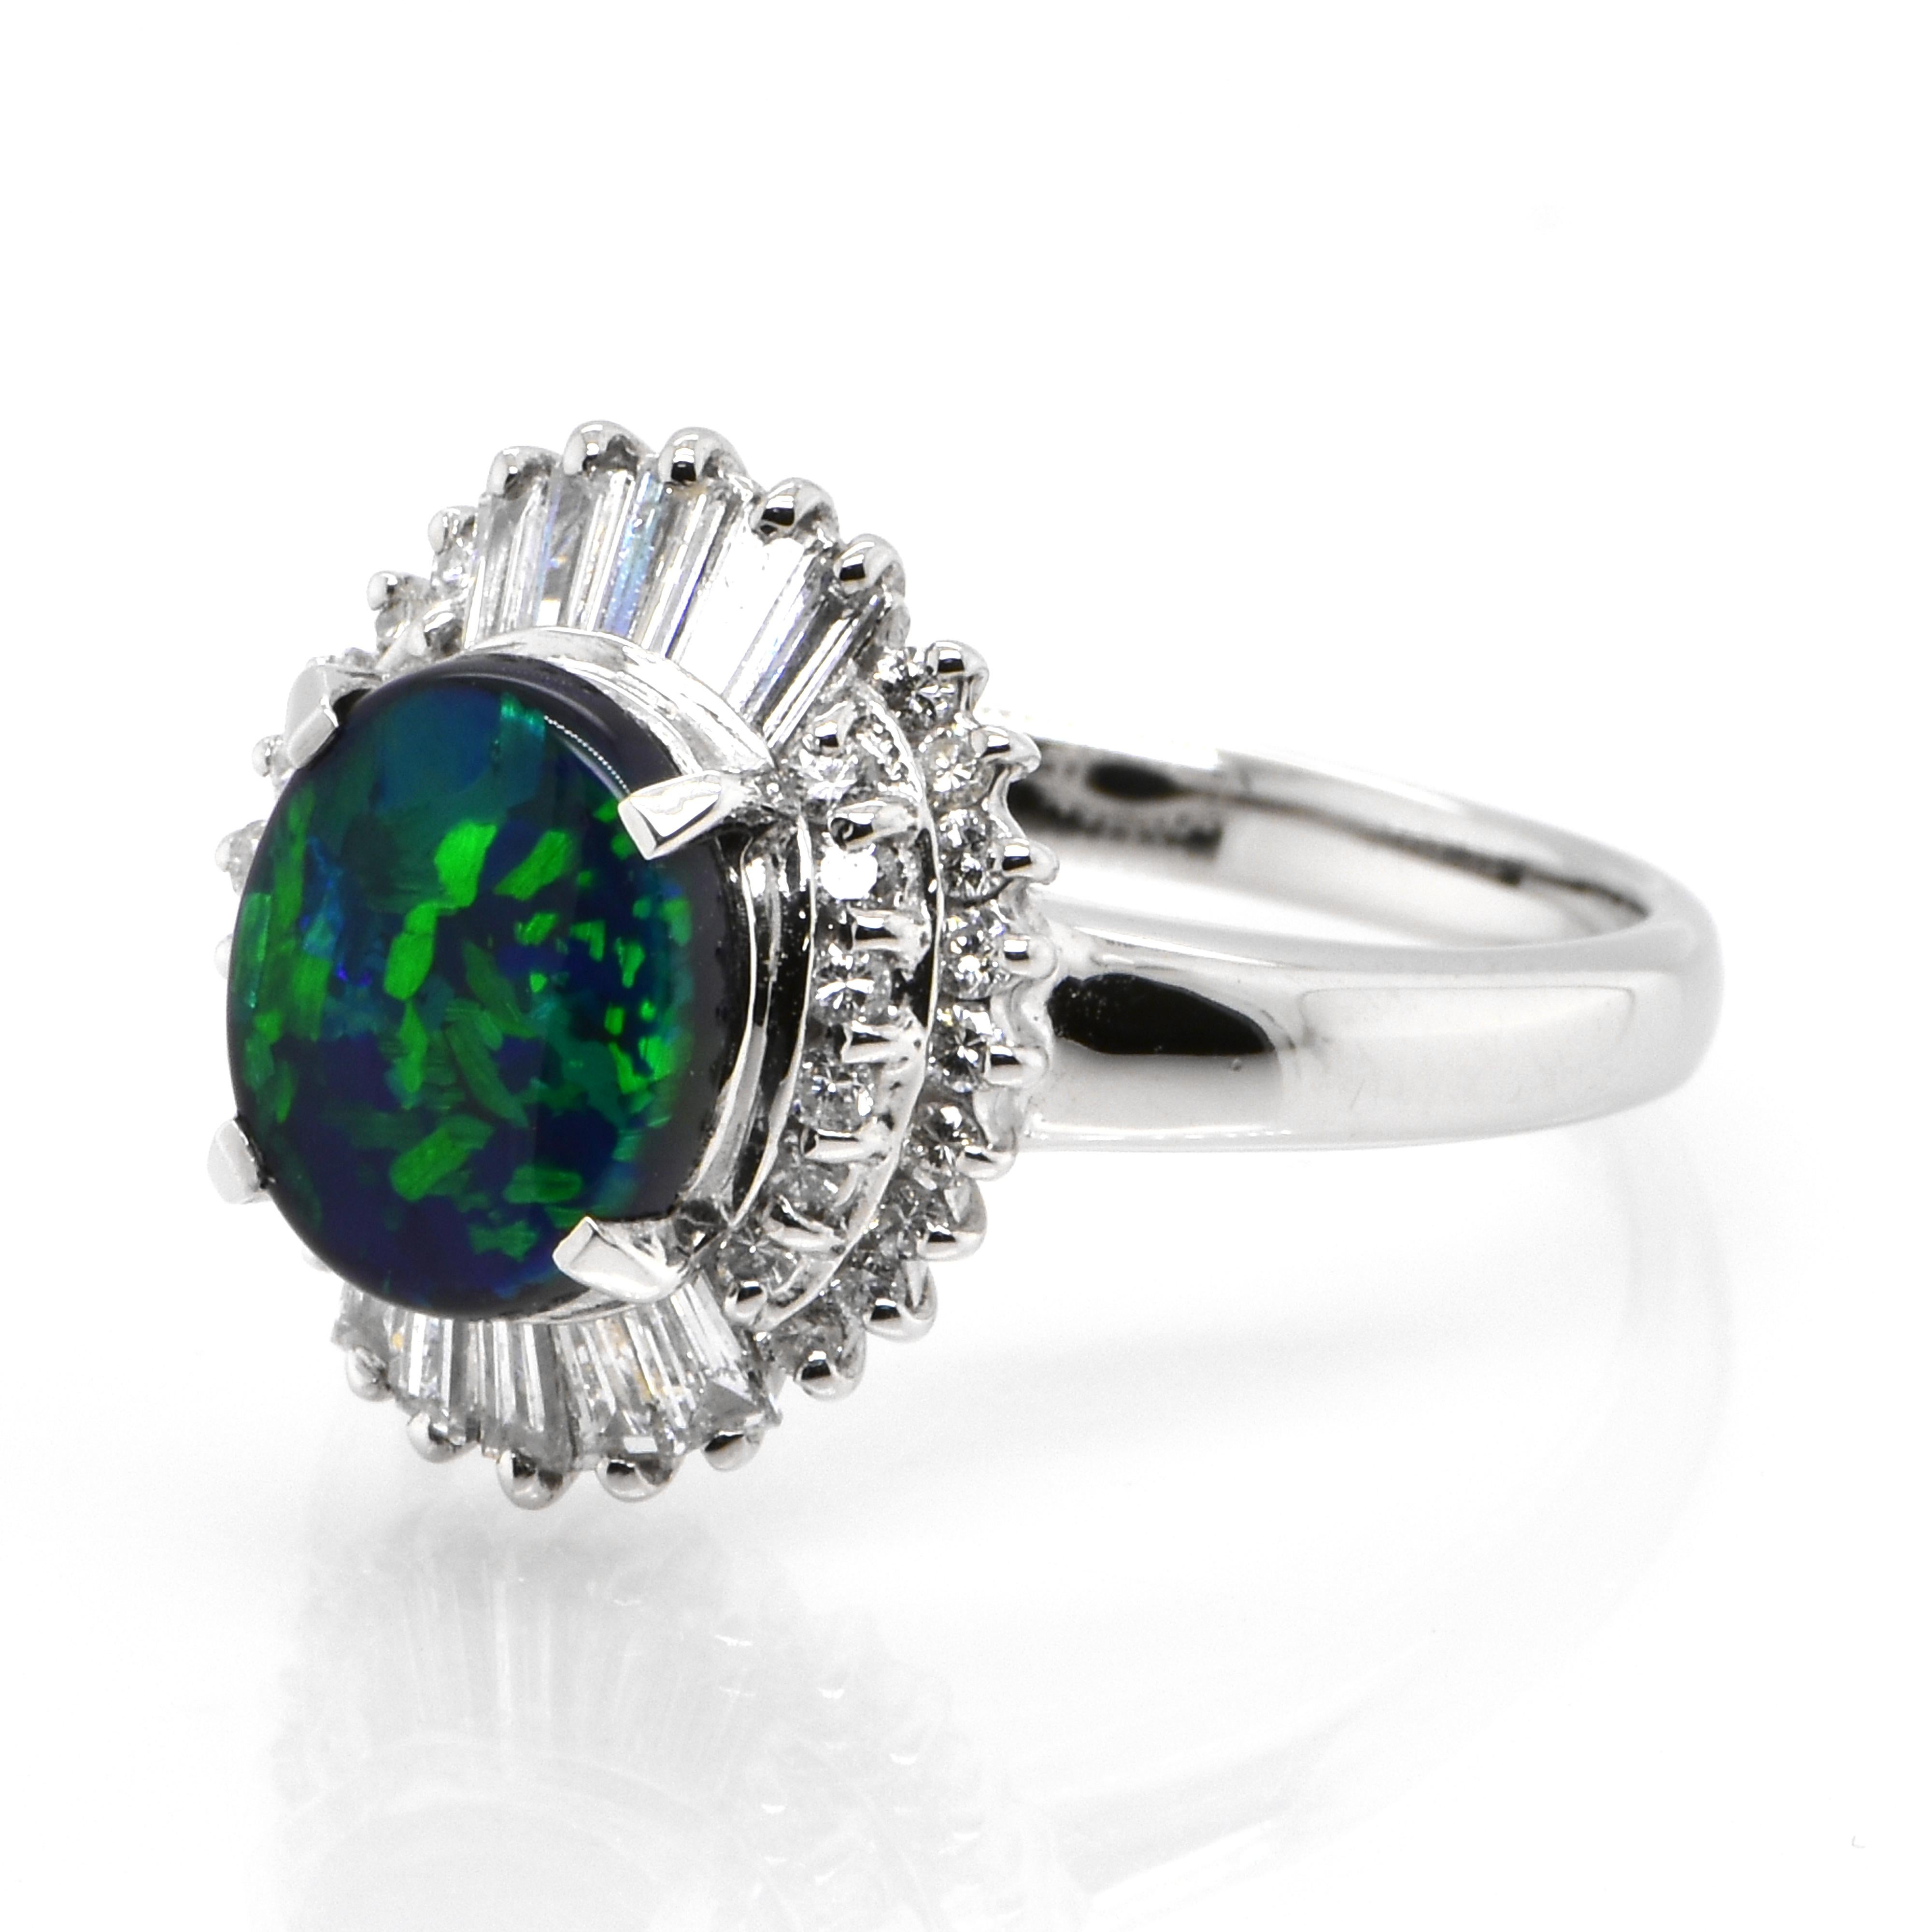 A beautiful ring featuring a 1.21 Carat, Natural, Australian Black Opal and 0.43 Carats of Diamond Accents set in Platinum. The Opal displays very good play of color! Opals are known for exhibiting flashes of rainbow colors known as 